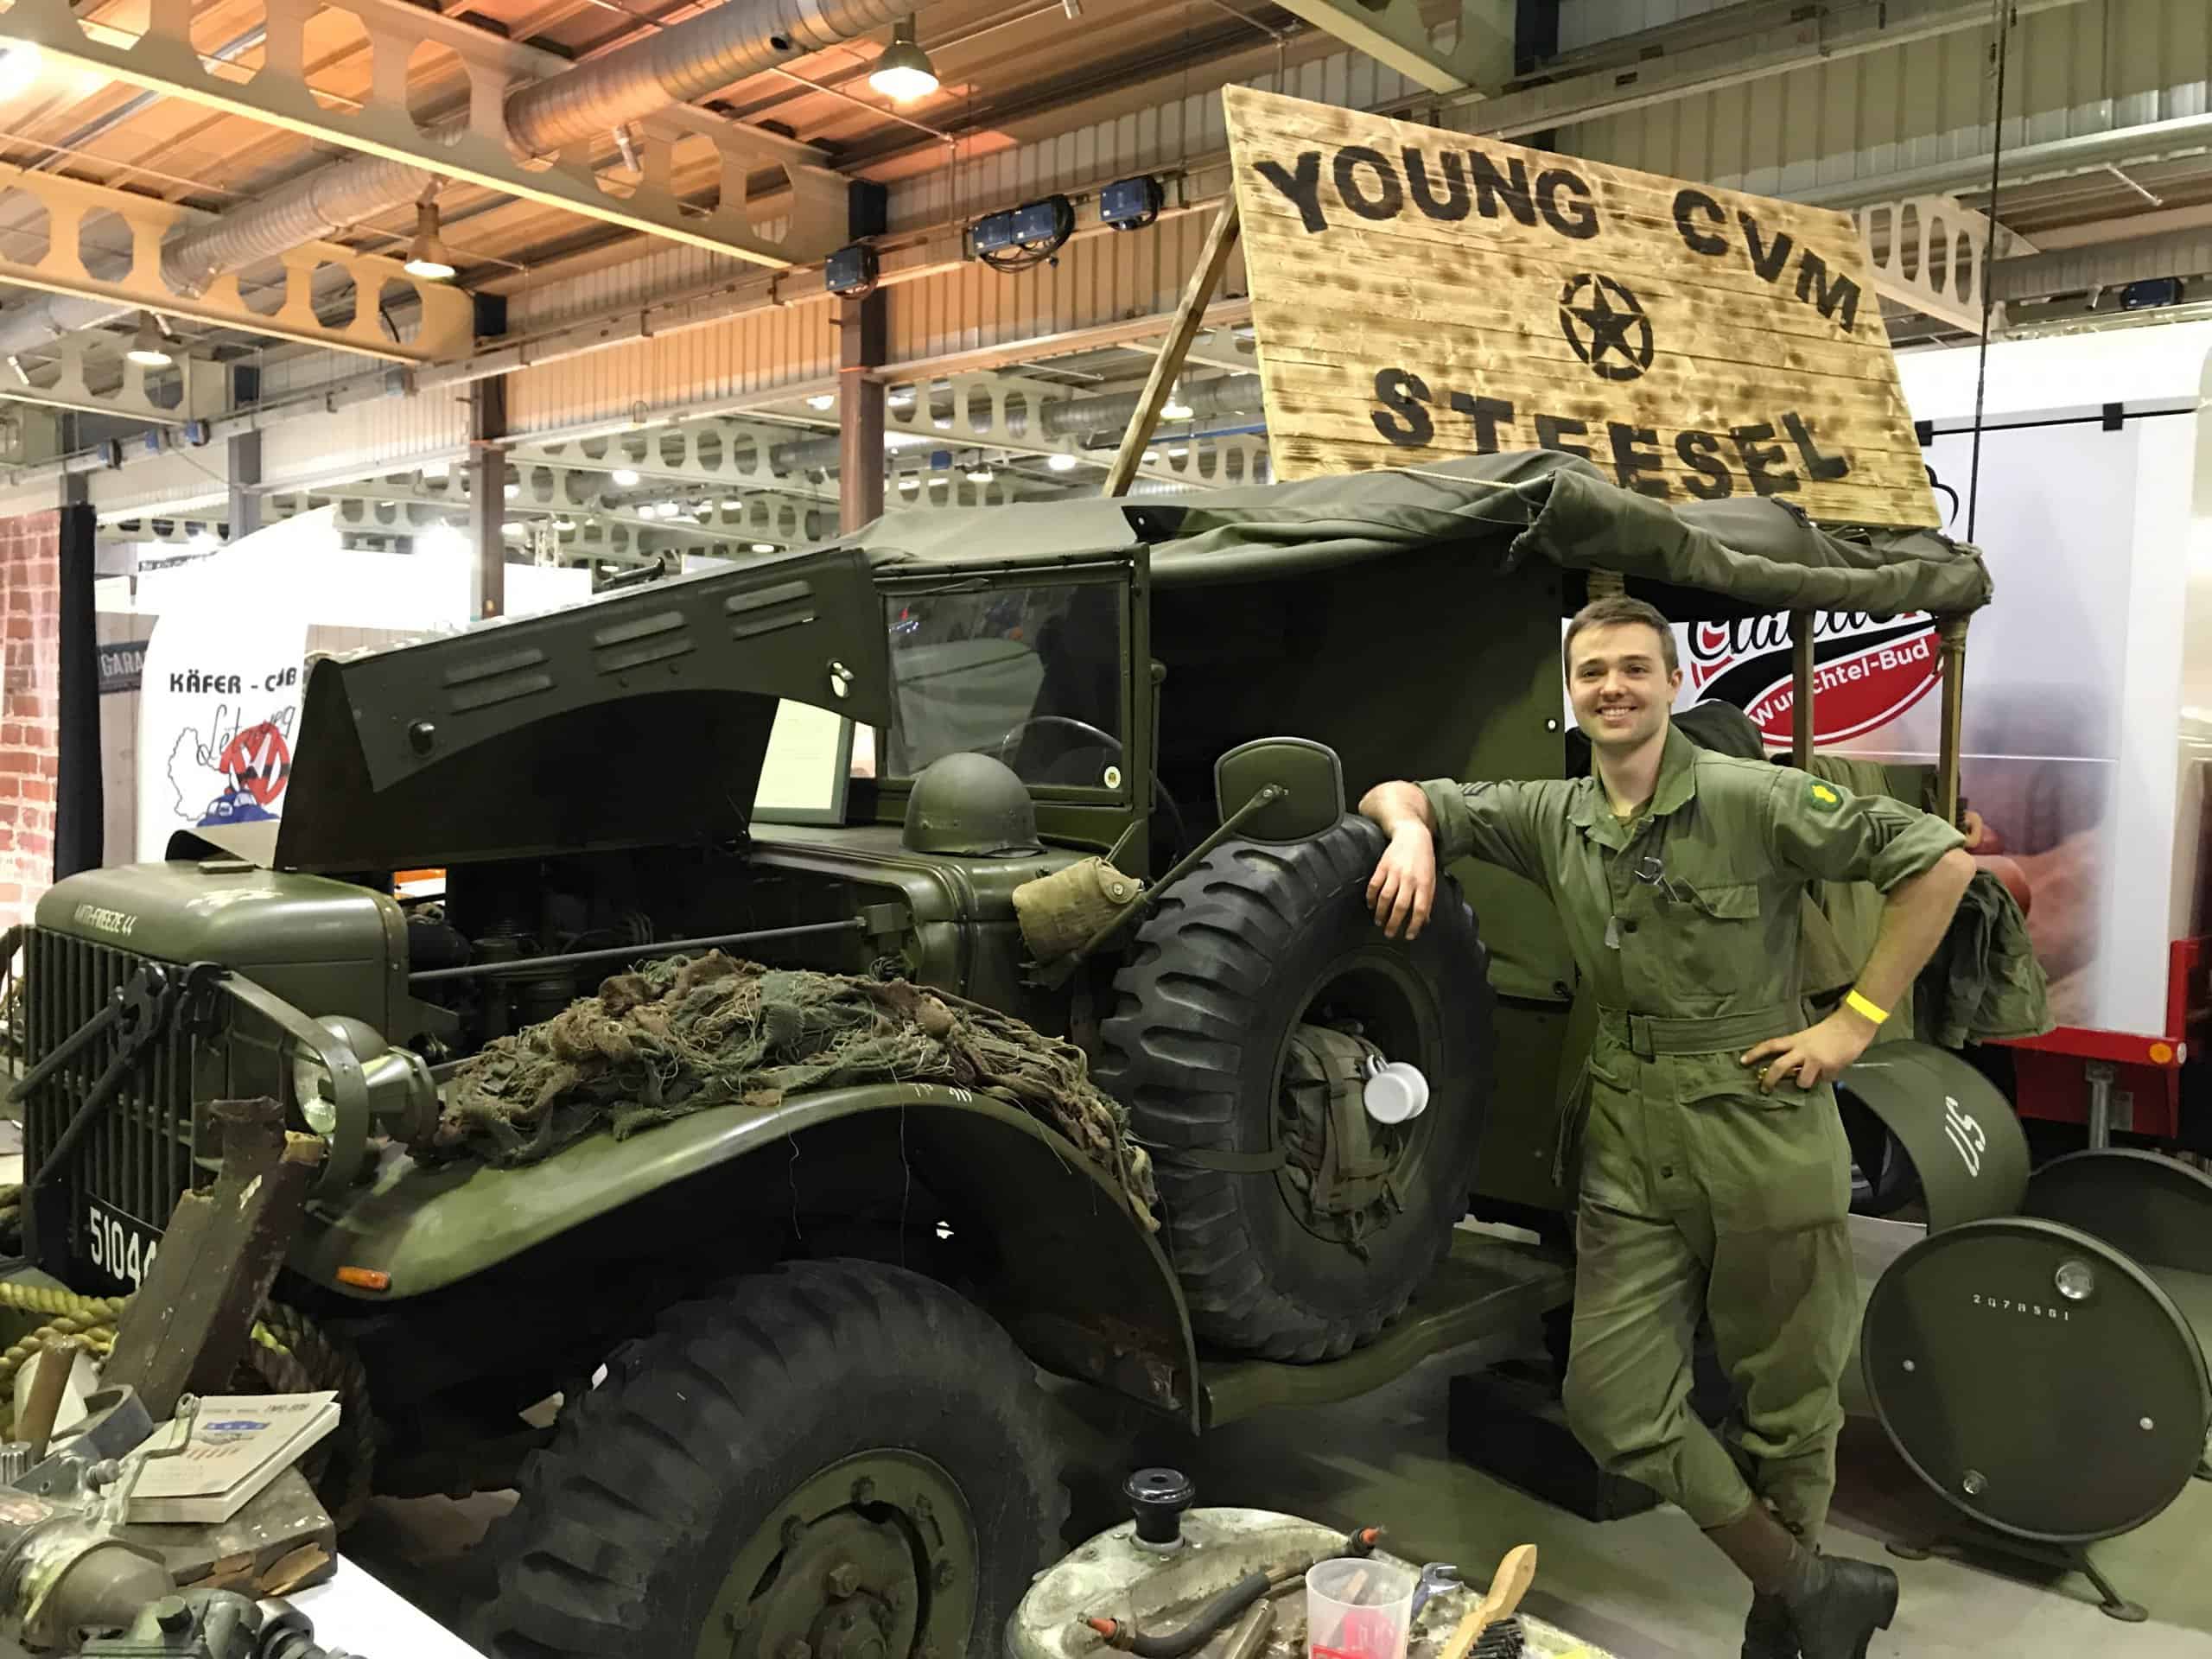 Youth group restores WW2 vehicle, 1943 Dodge WC51 truck restored by youth group, ClassicCars.com Journal